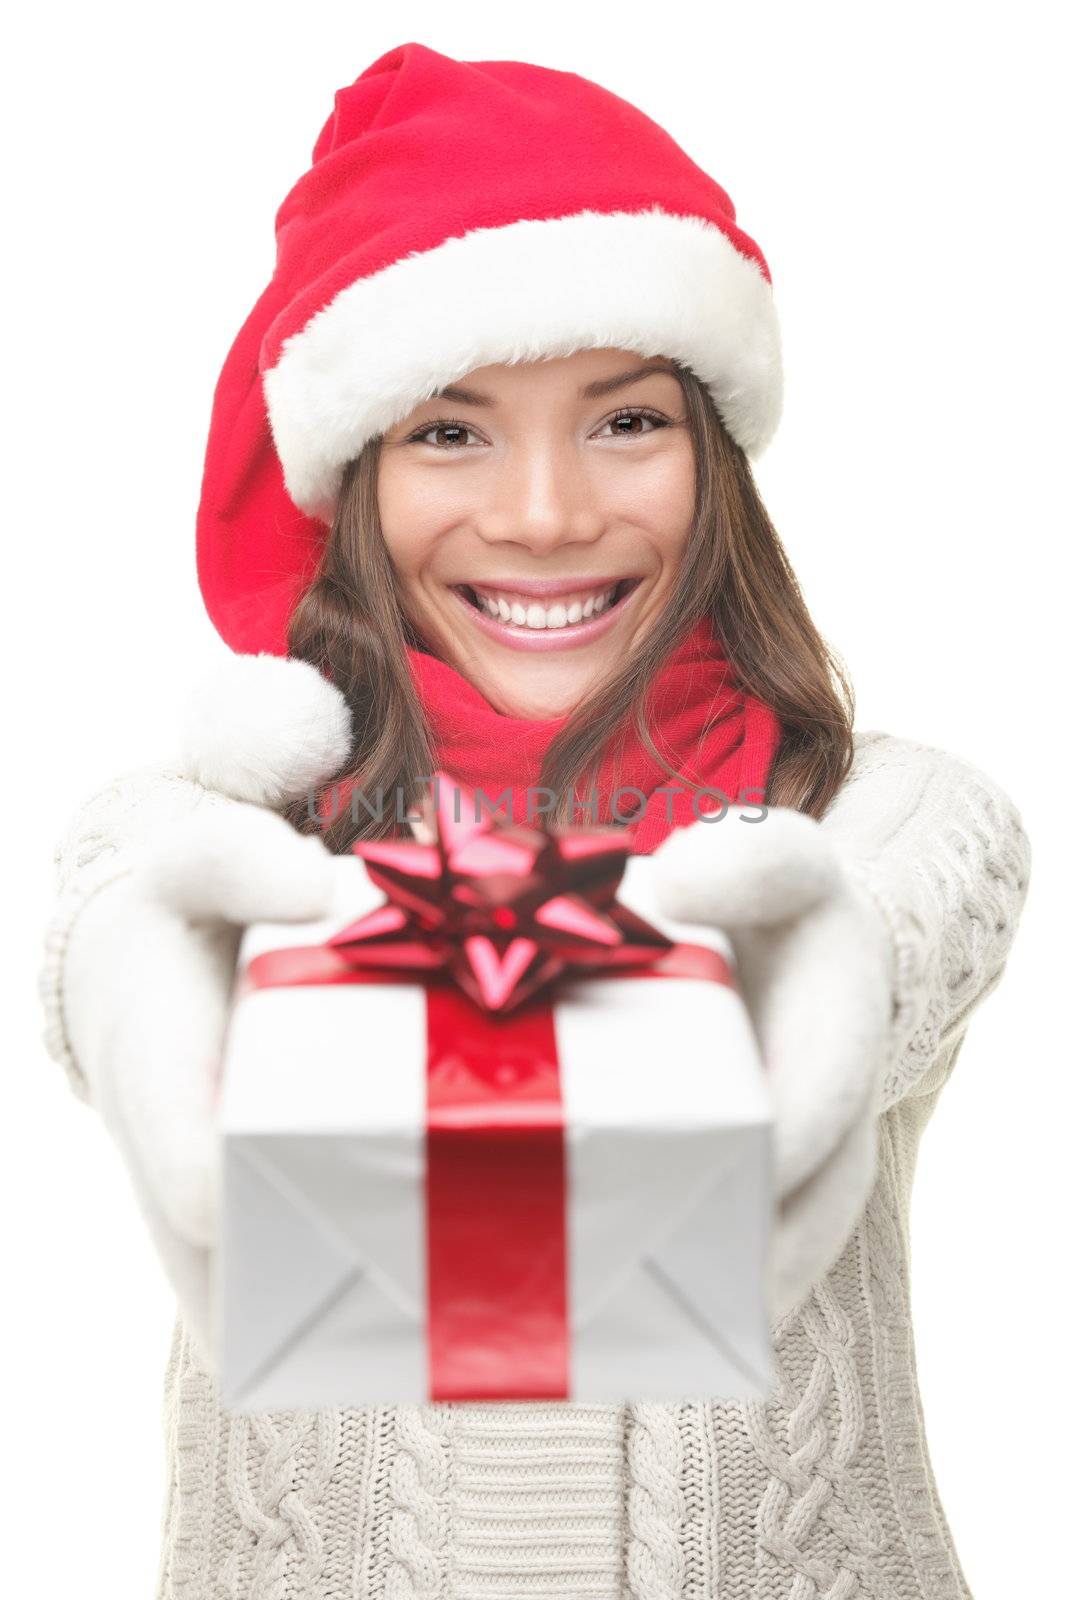 Christmas gift woman smiling holding present isolated on white background. Santa girl in winter sweater showing gift wearing Santa hat. Cute, beautiful model: mixed Asian / Caucasian.